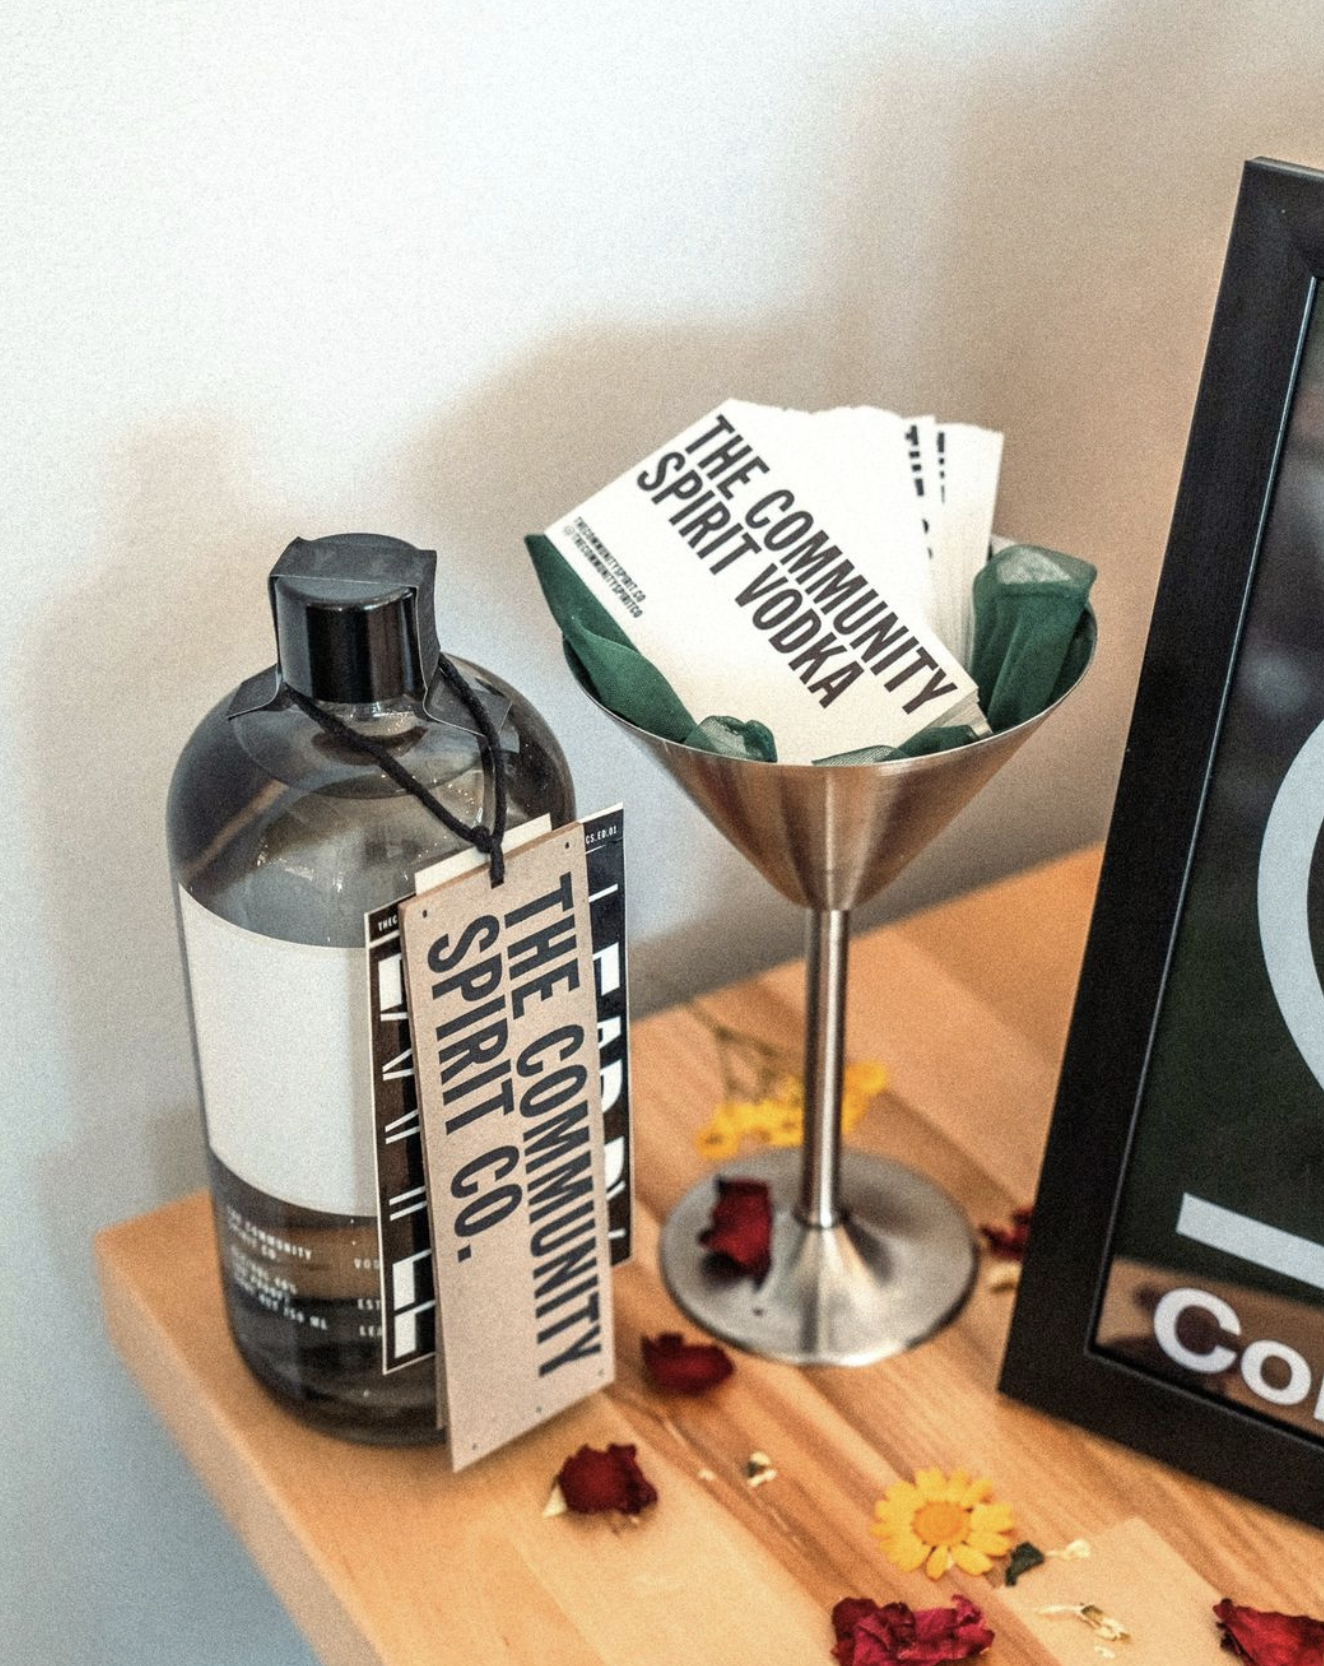 Bottle of Community Spirit Vodka next to martini glass of business cards.